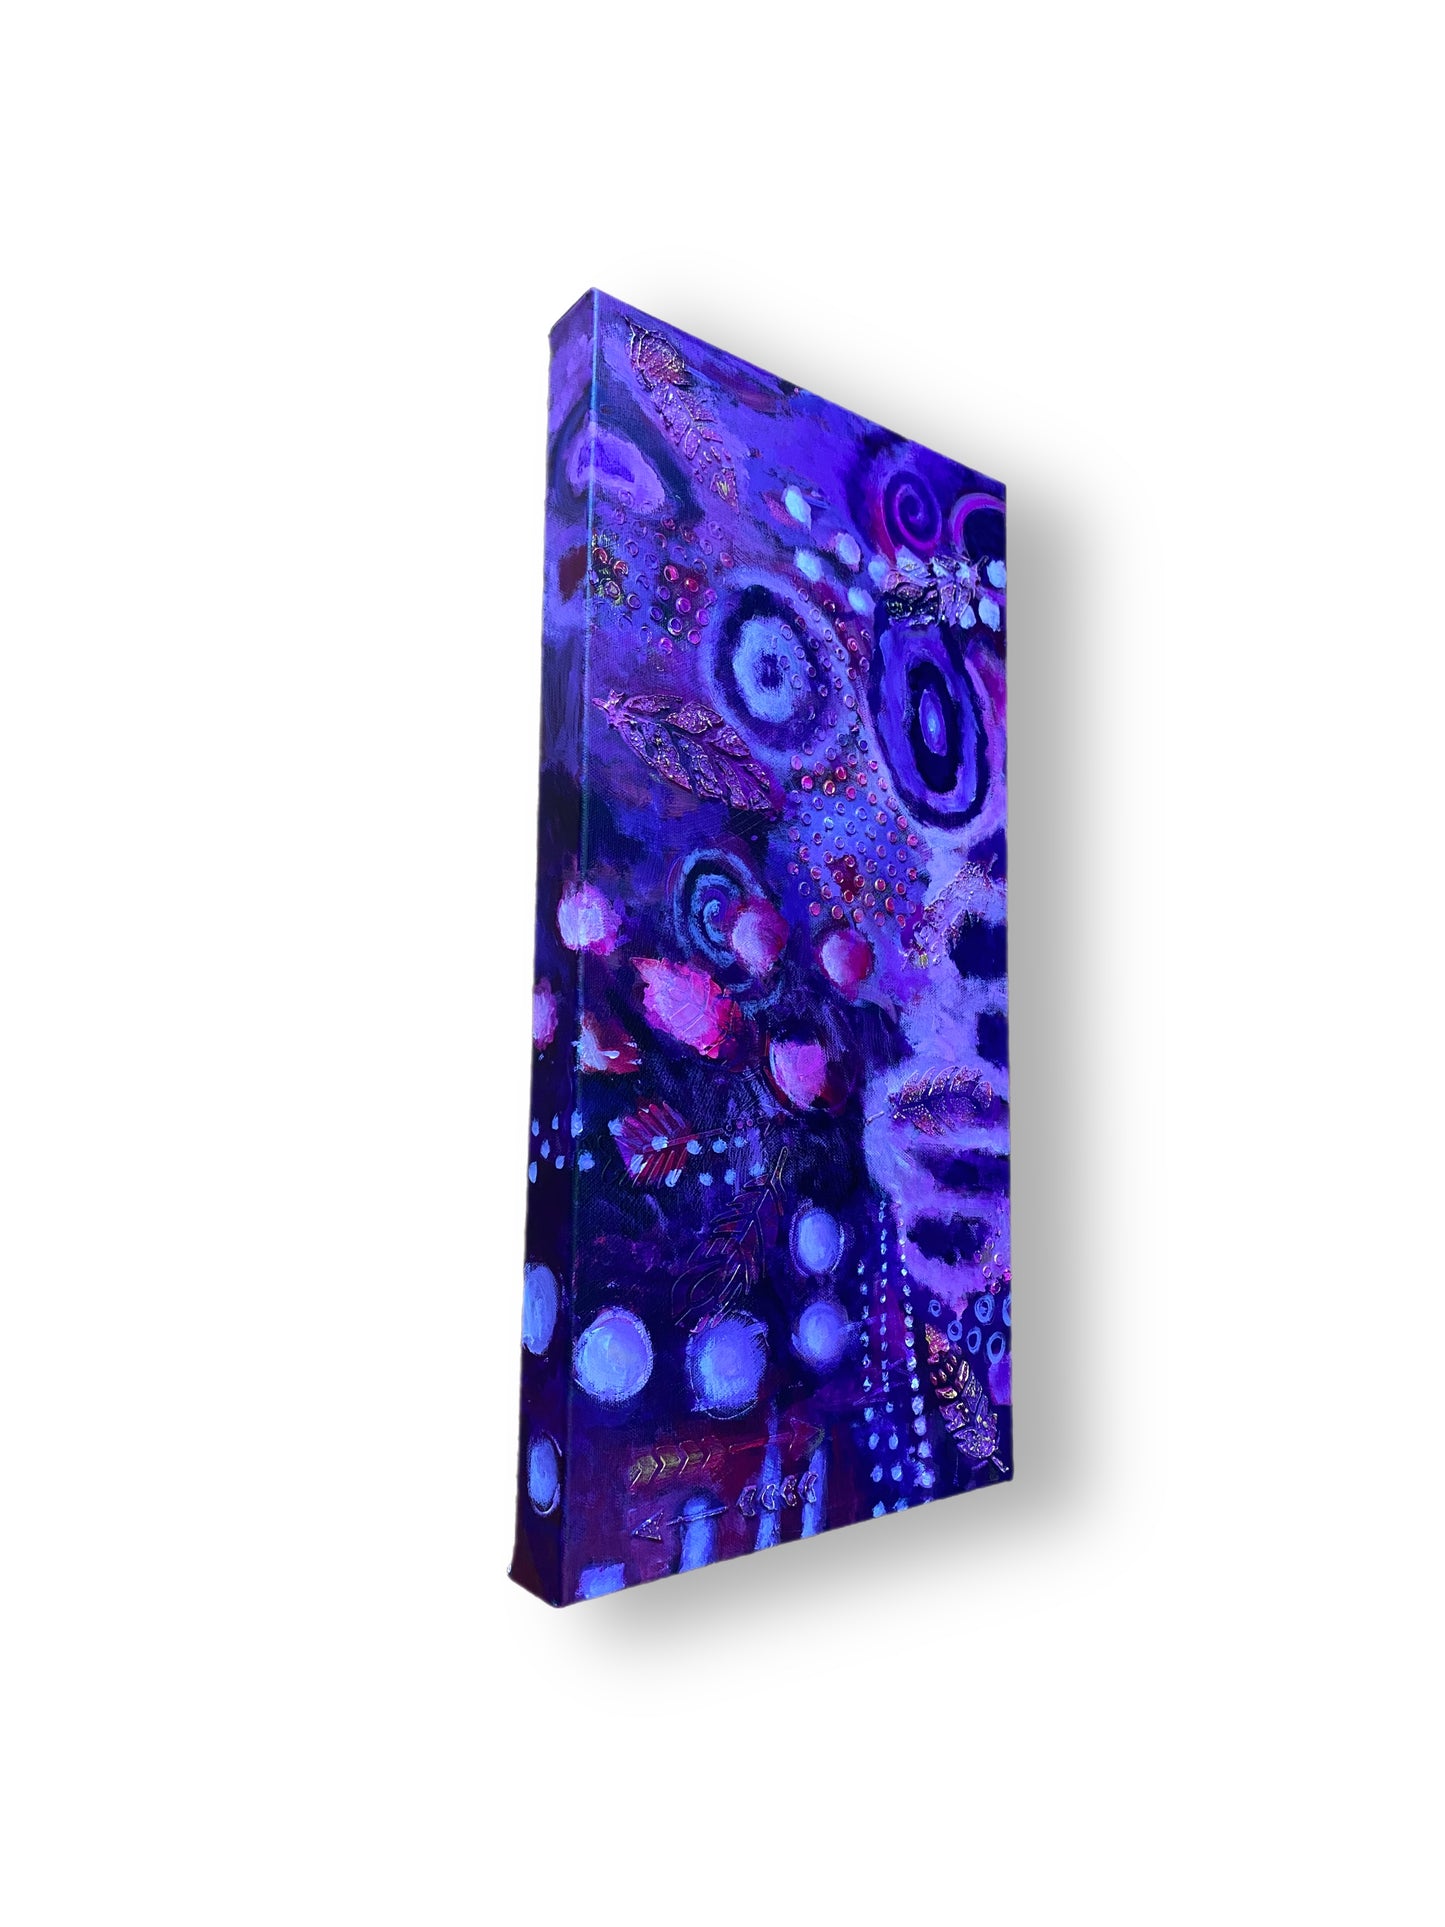 Space and Time Original Canvas Art